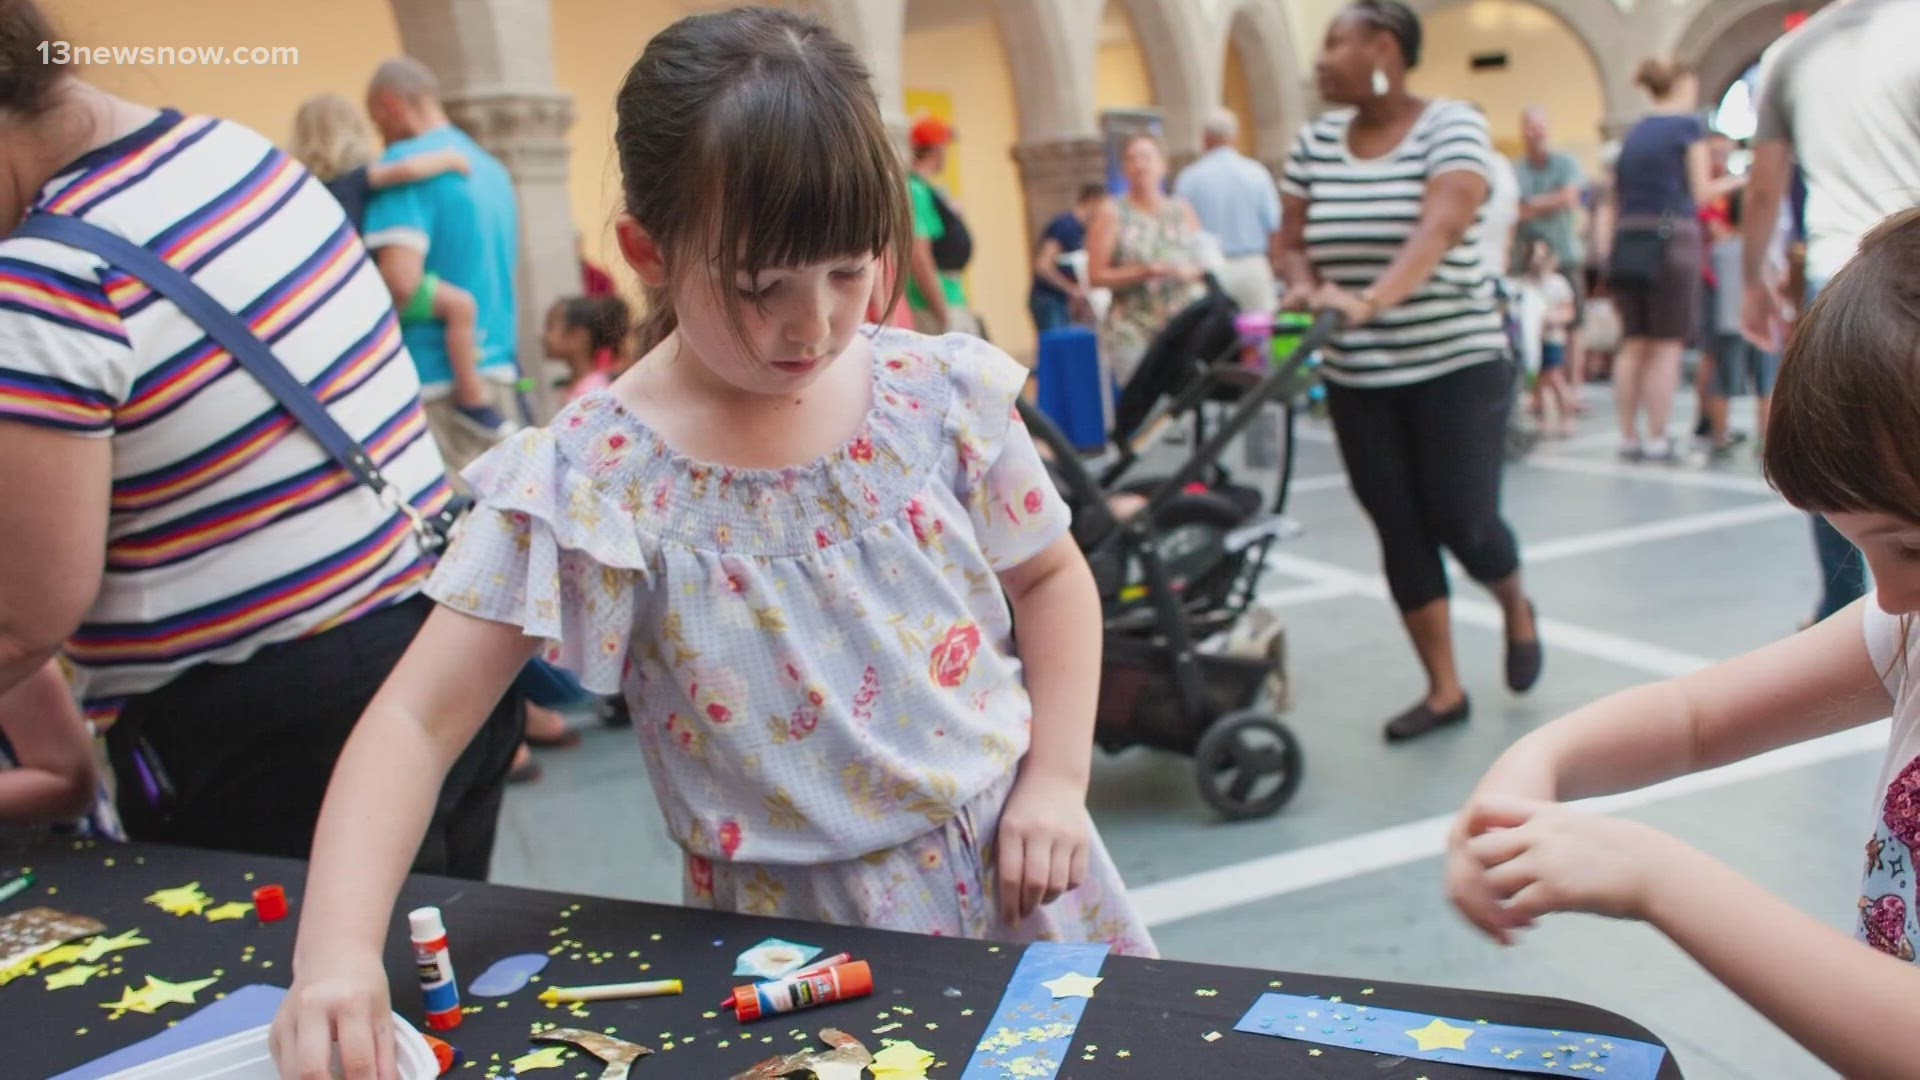 This weekend, you can let your imagination soar at a family festival at the Chrysler Museum in Norfolk.